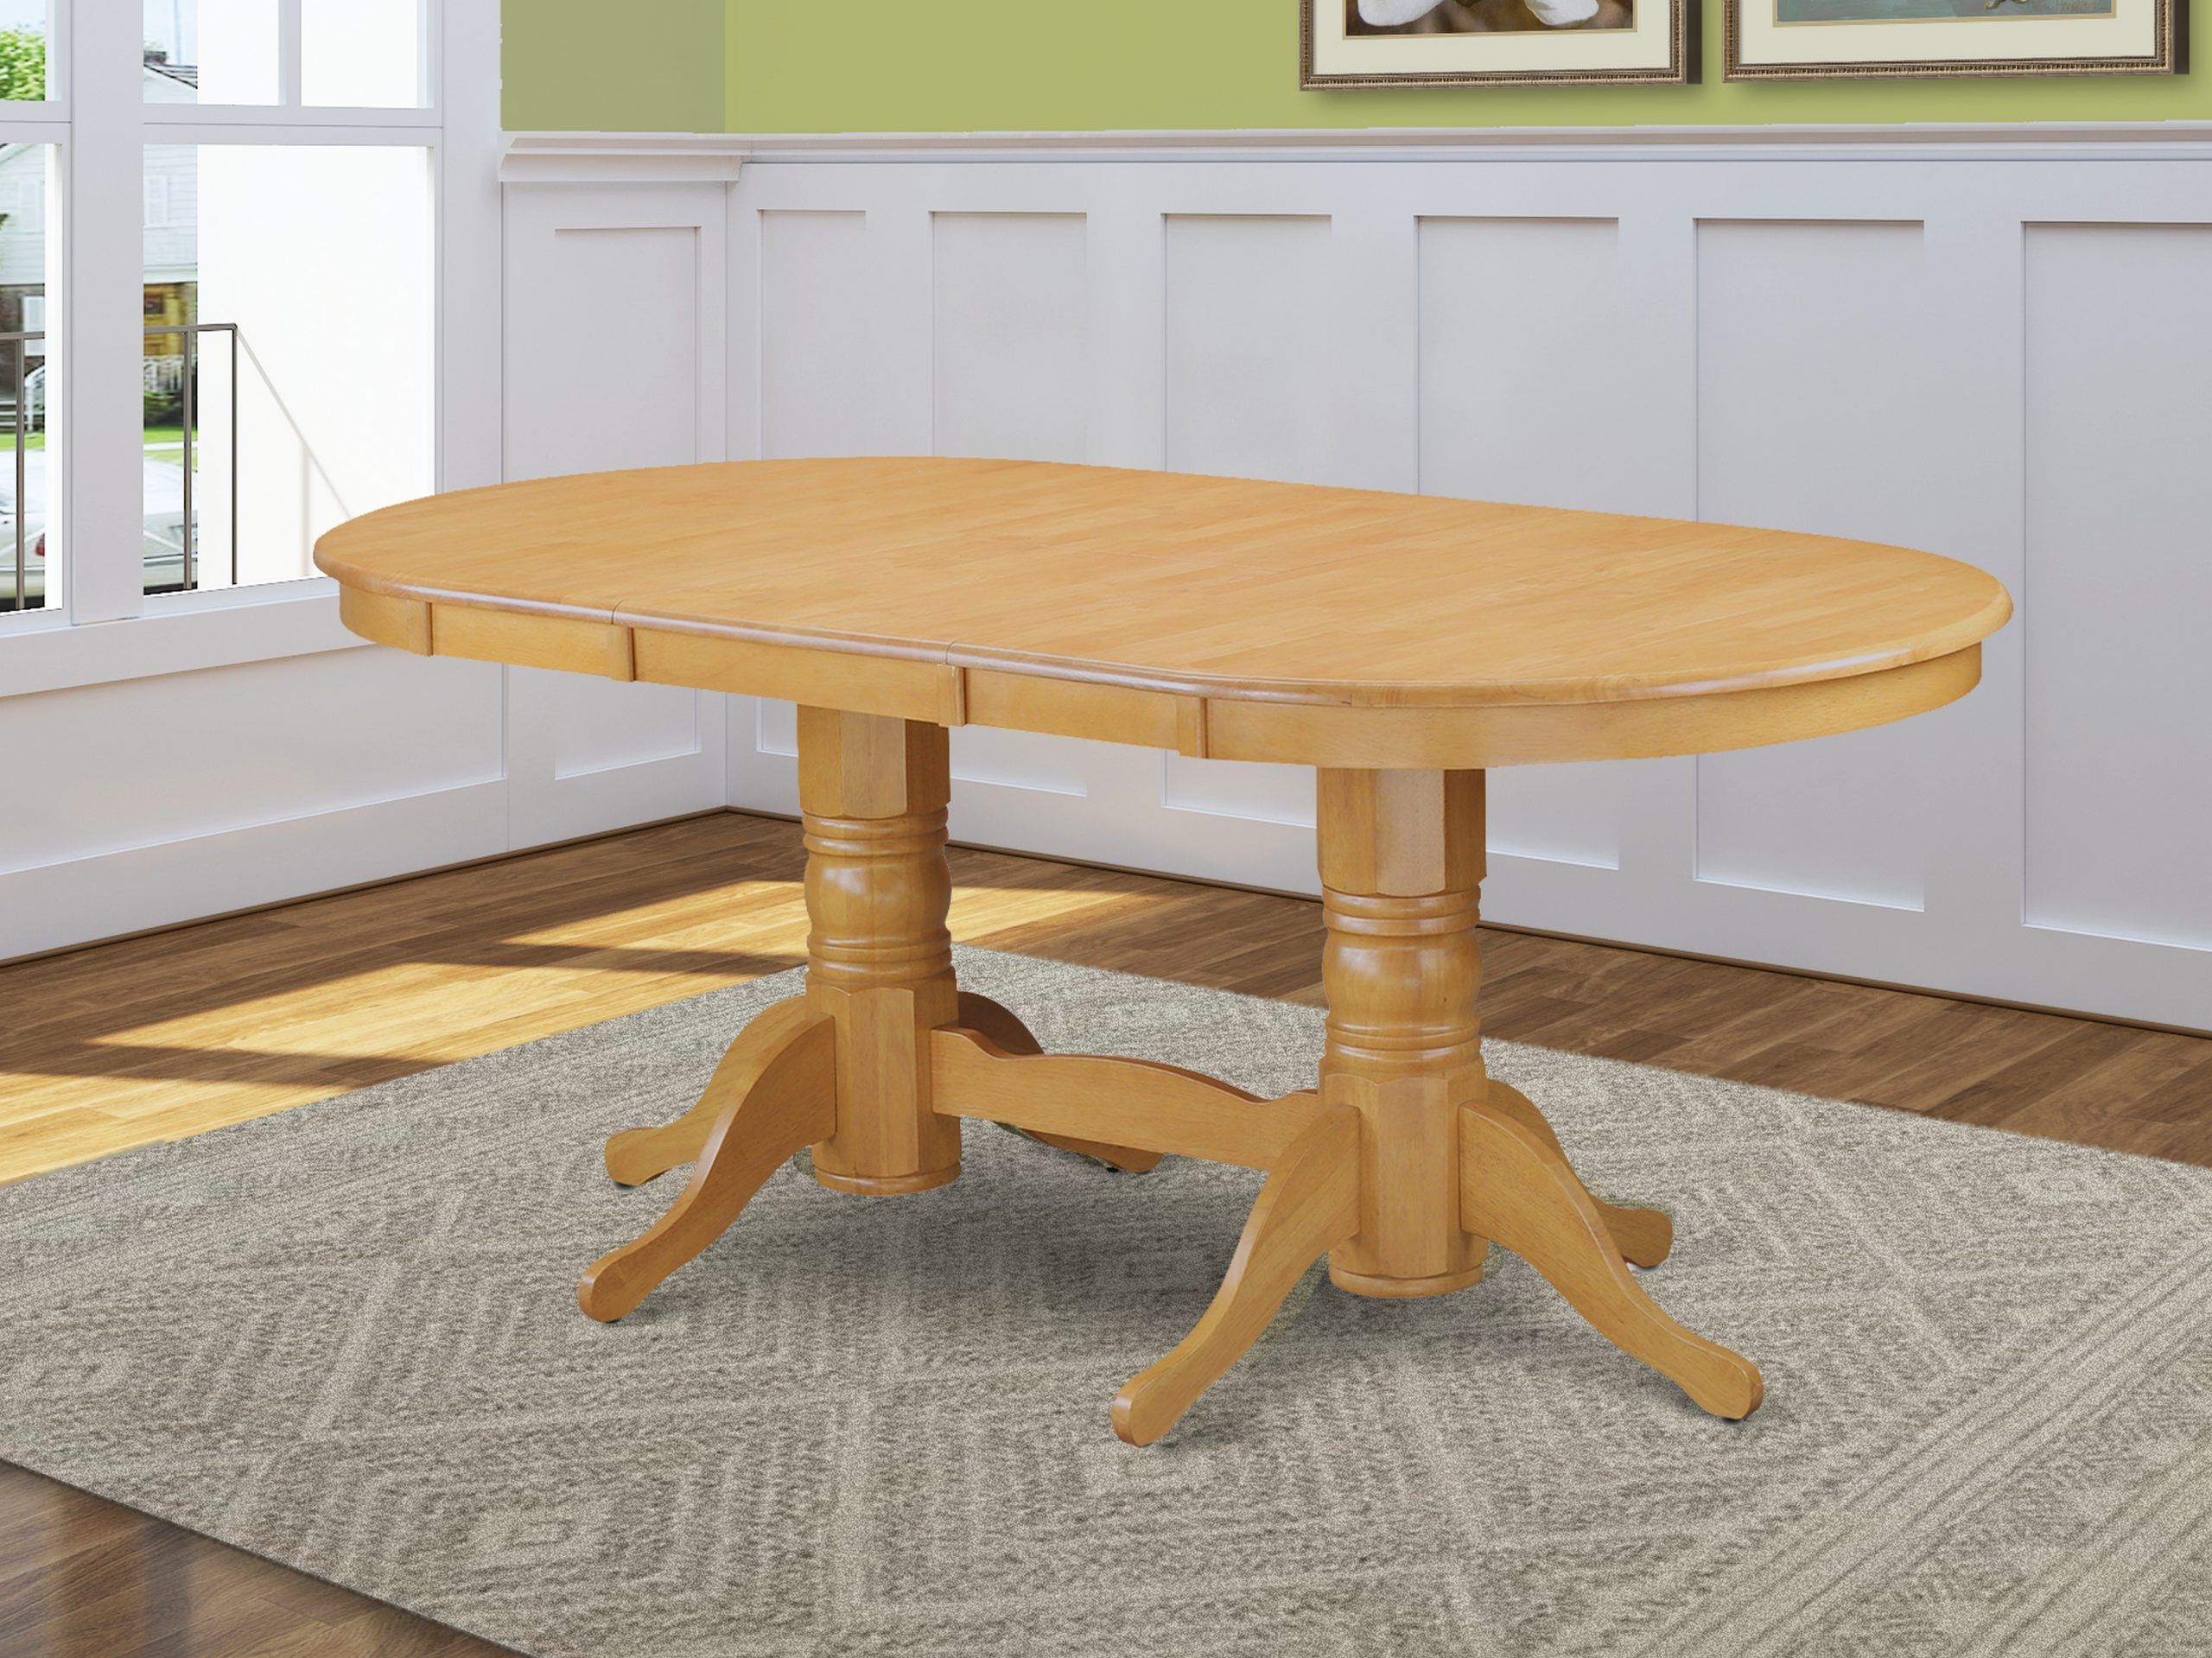 Vat Oak Tp Rectangular Round Corner Dining Table With 17 For Popular Leaf Round Console Tables (View 1 of 10)